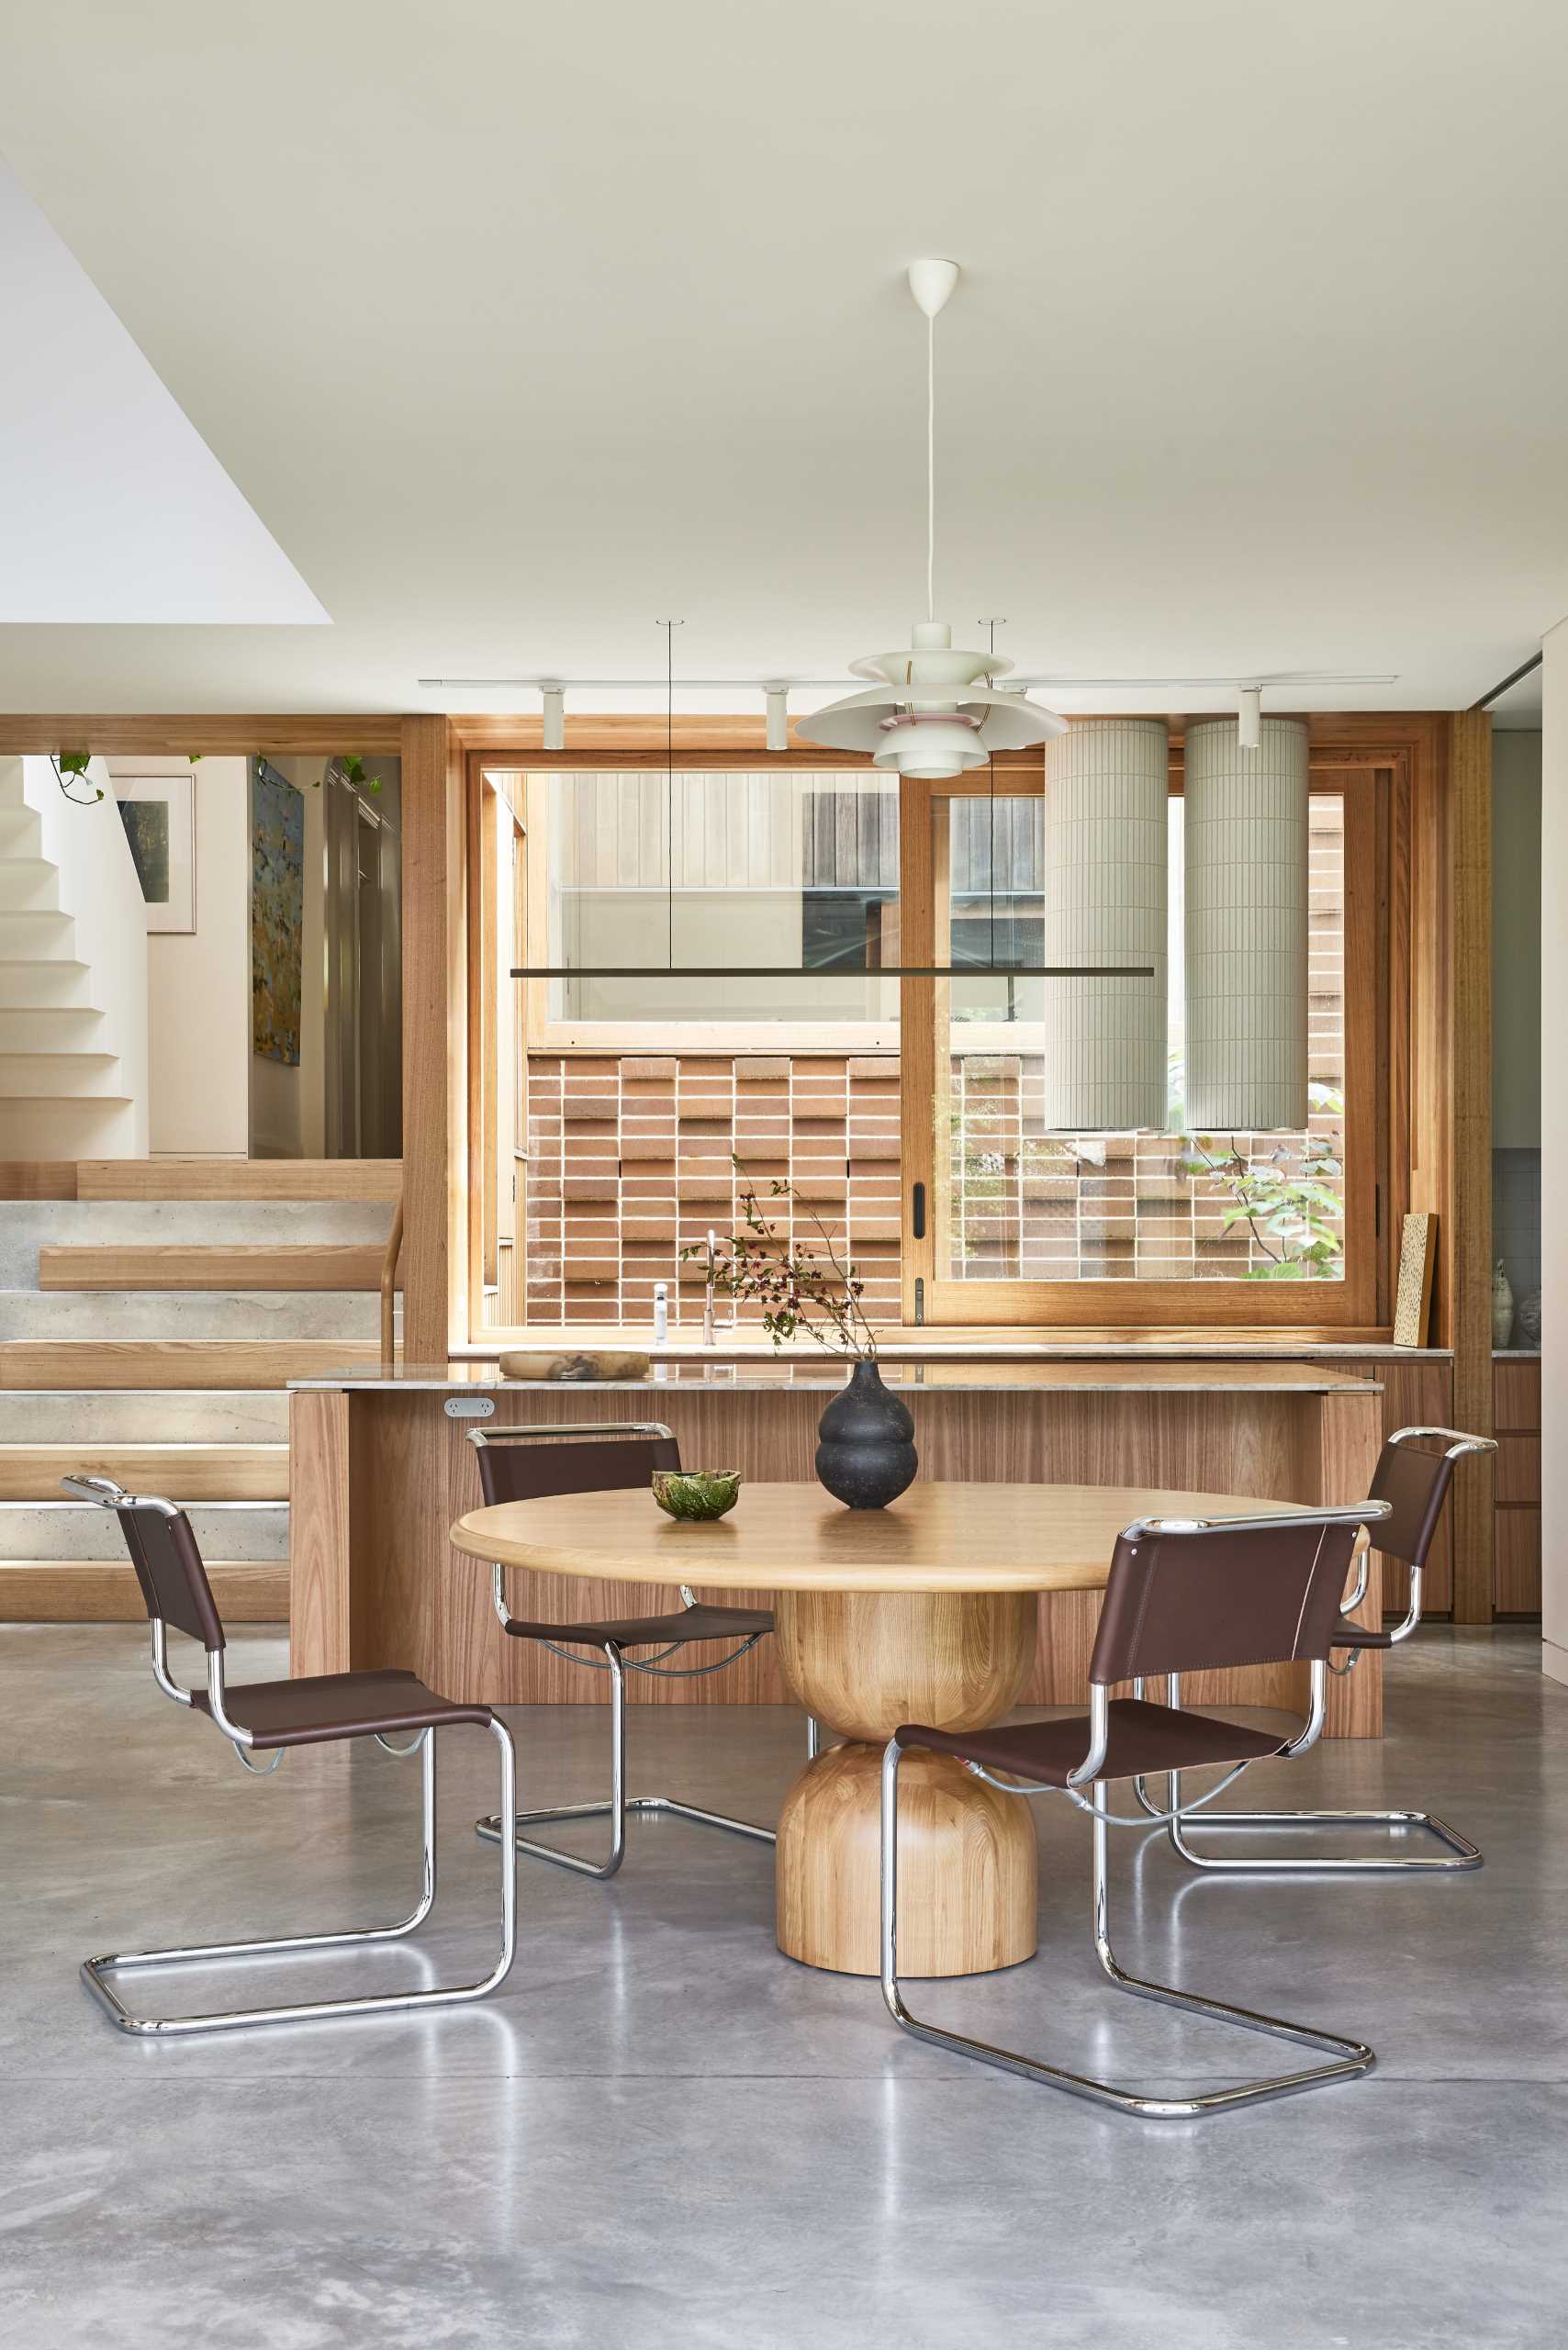 In the new kitchen and dining area, a round dining table is positioned below a pendant light, while the kitchen has an island and a large sliding window that provides views of the original home.